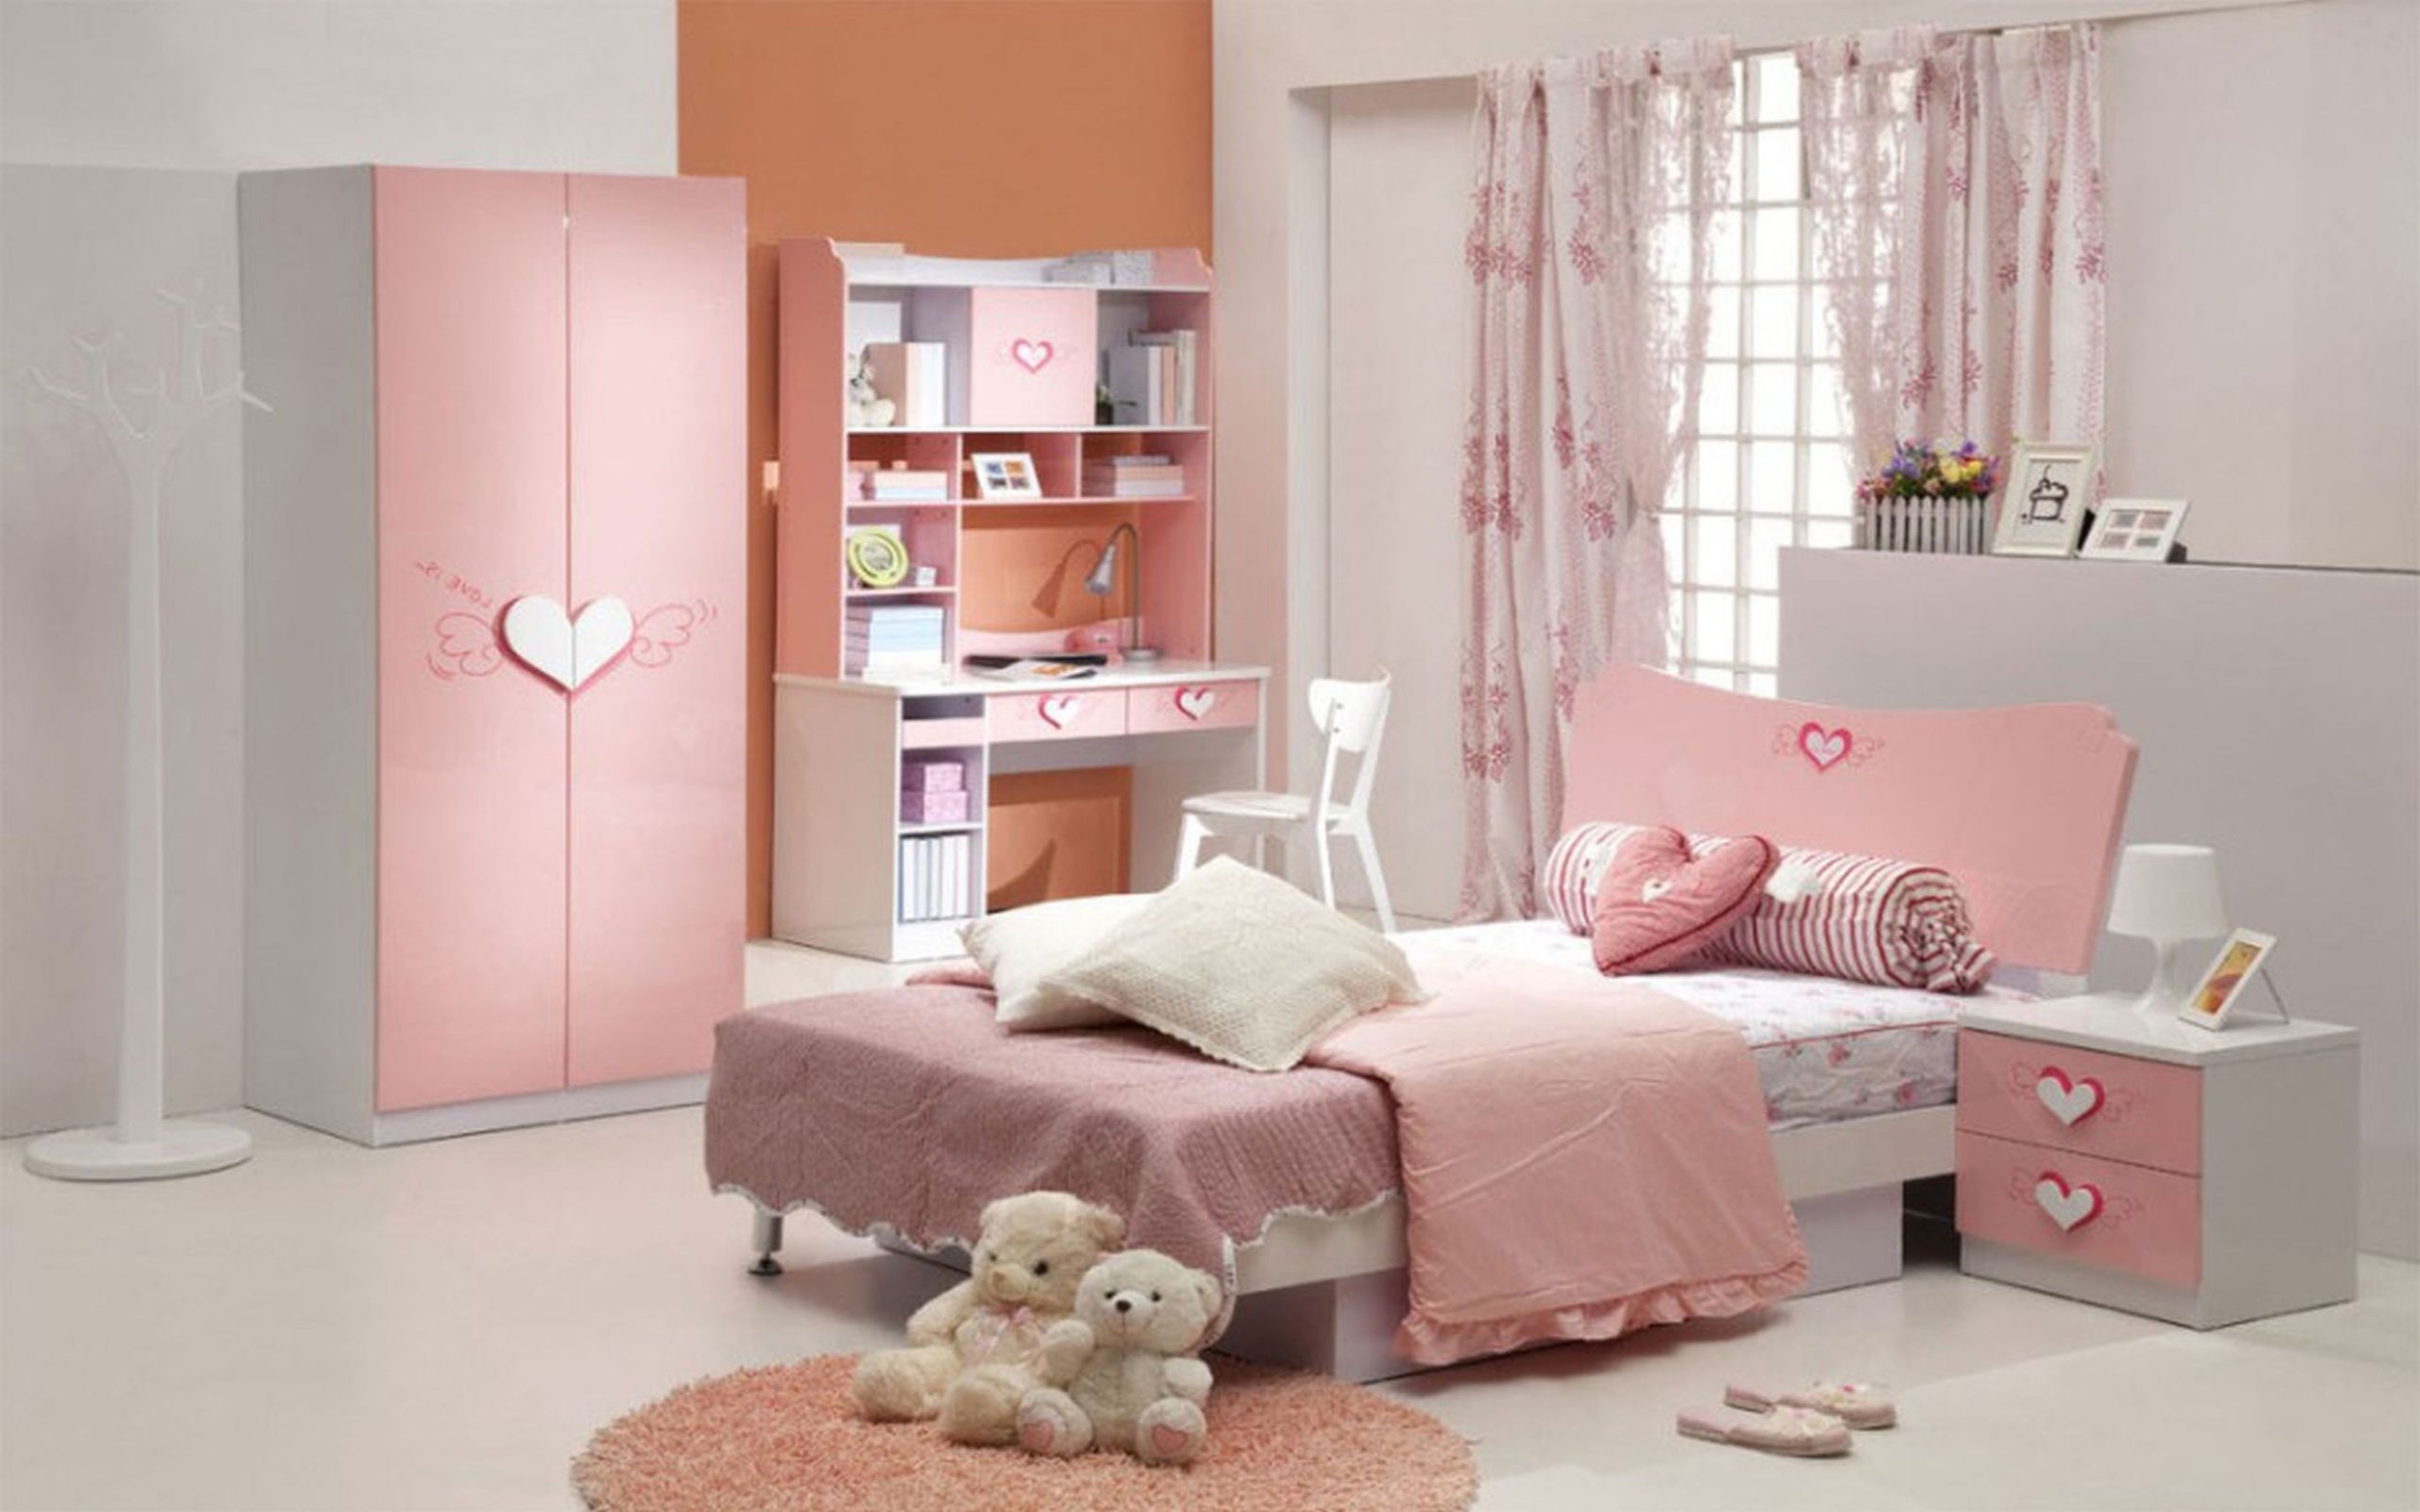 2560x1600 White Bunk Beds Girls Room Wallpaper House Pink And Sweet Teen Bedroom  Style Interior Decorating Ideas Pretty